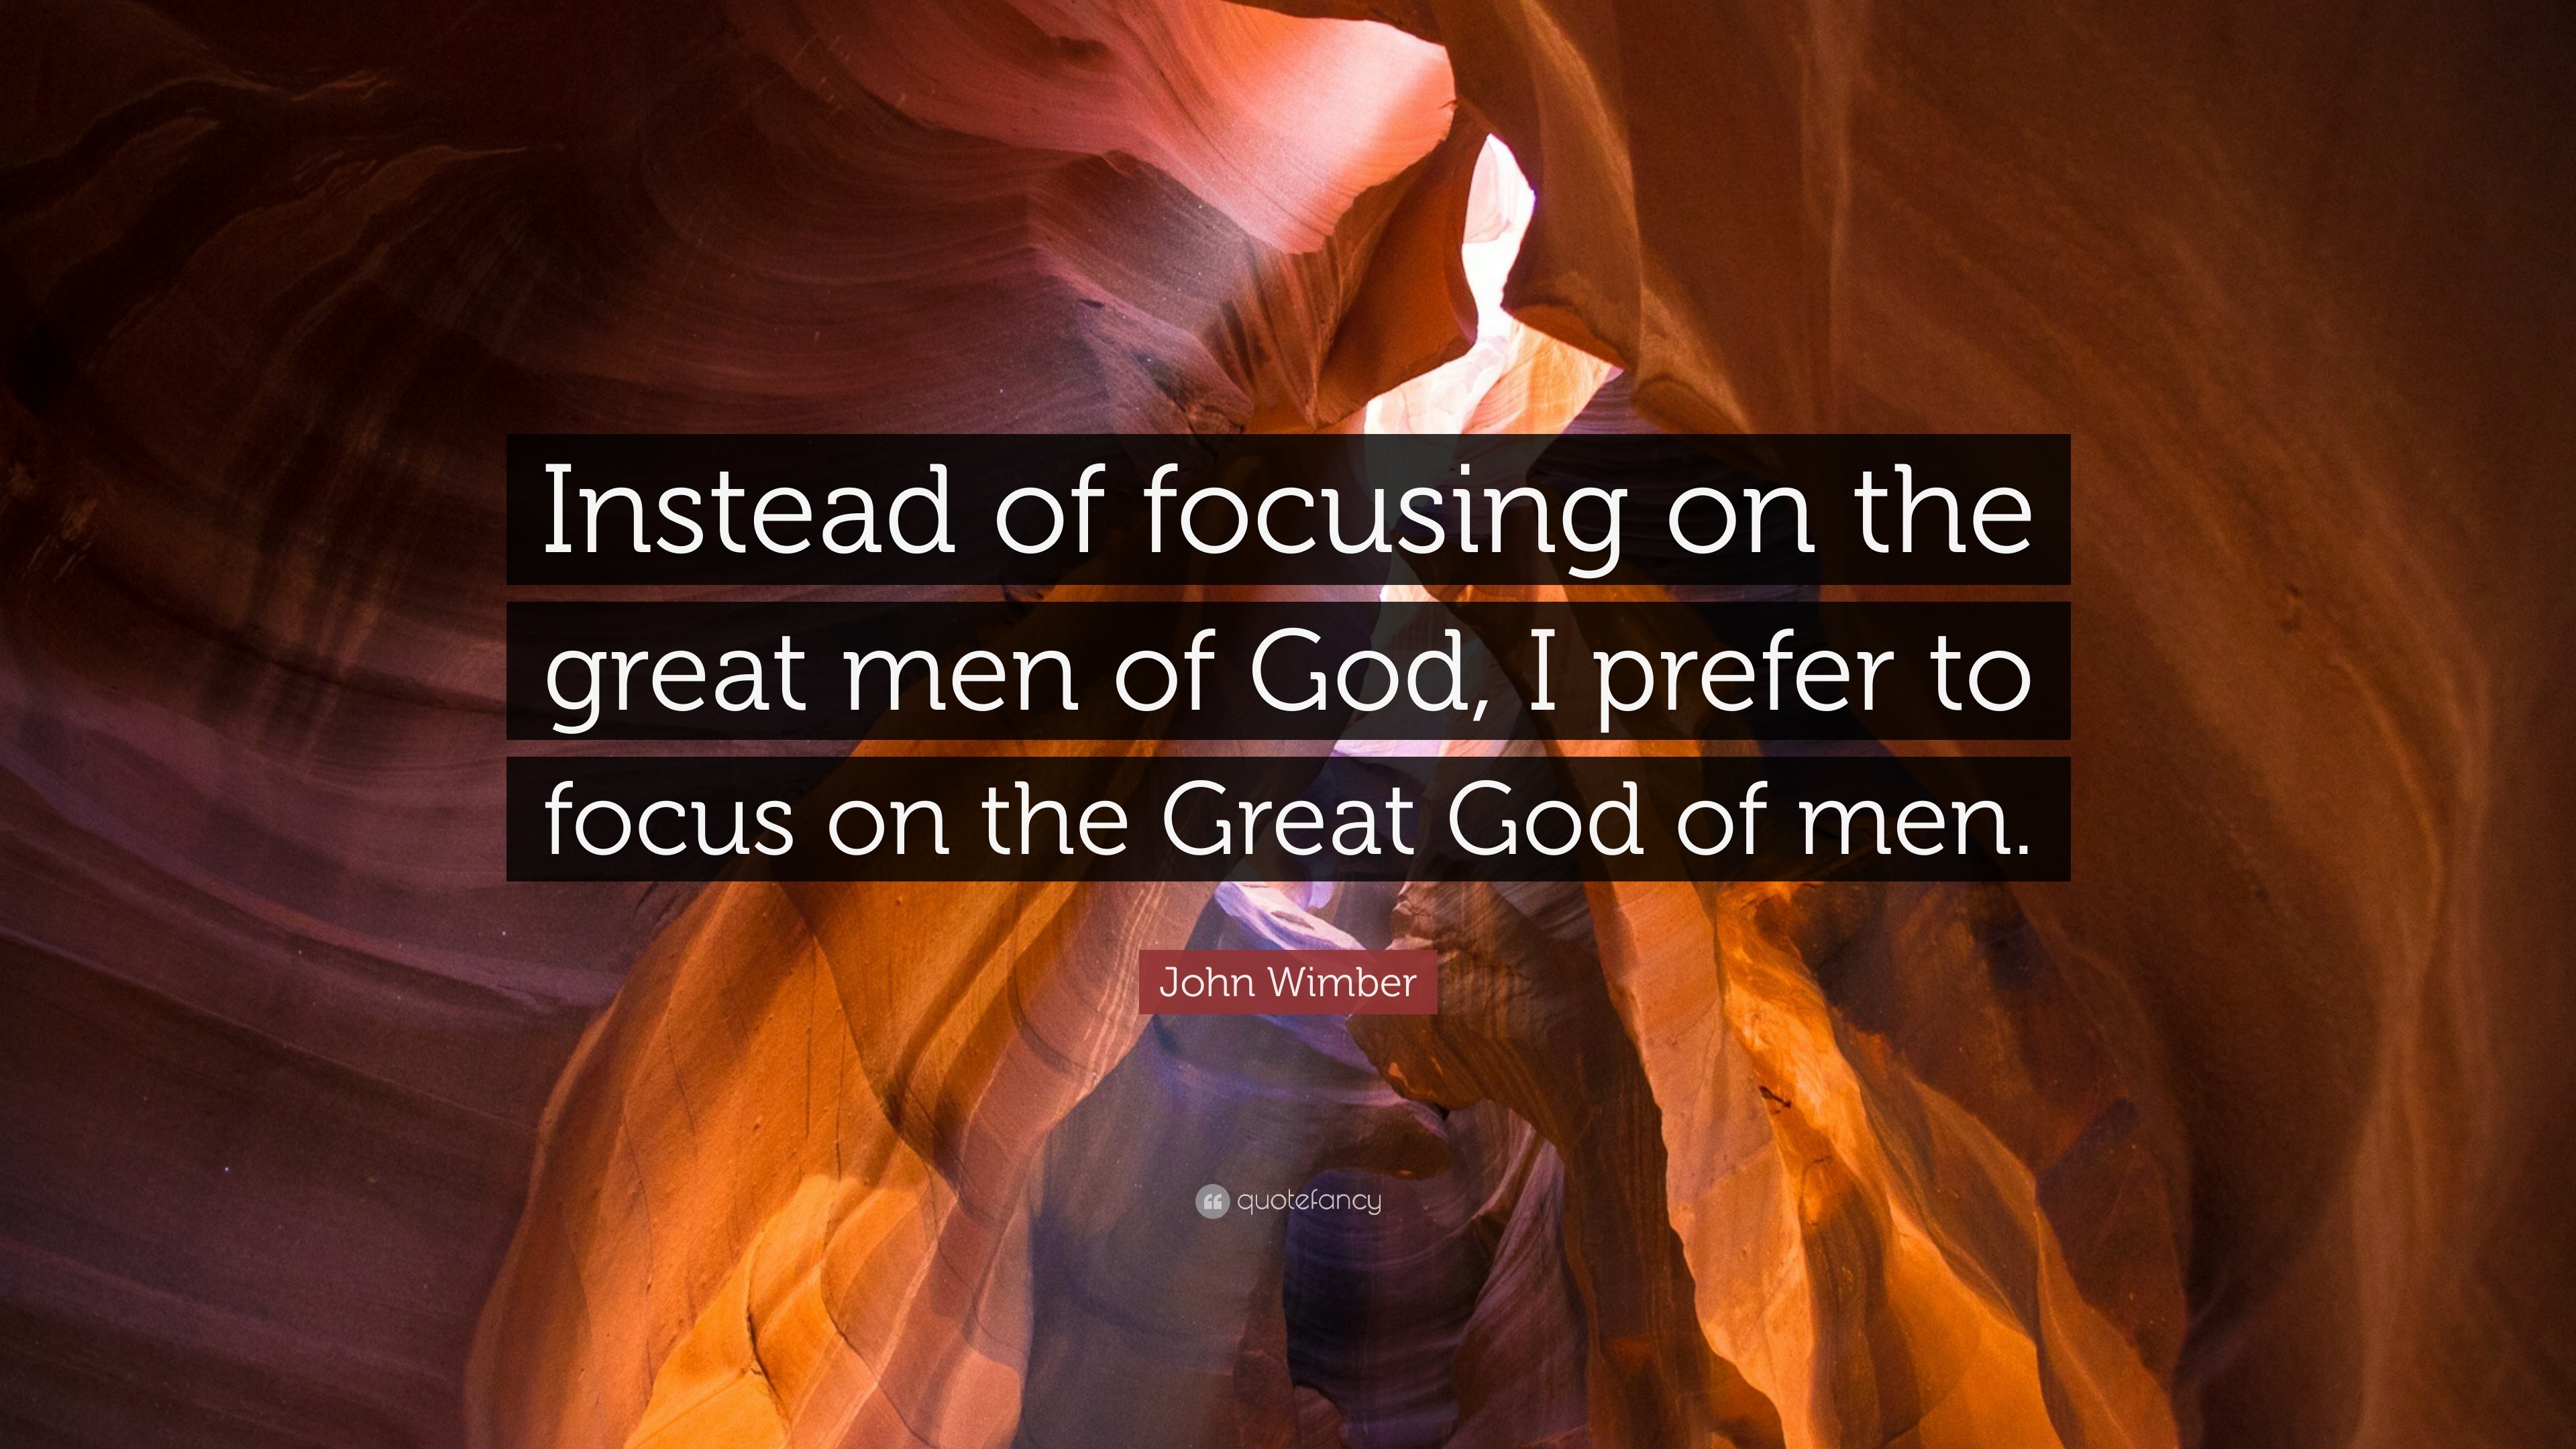 Instead of focusing on the great men of God, I prefer to focus on the Great...